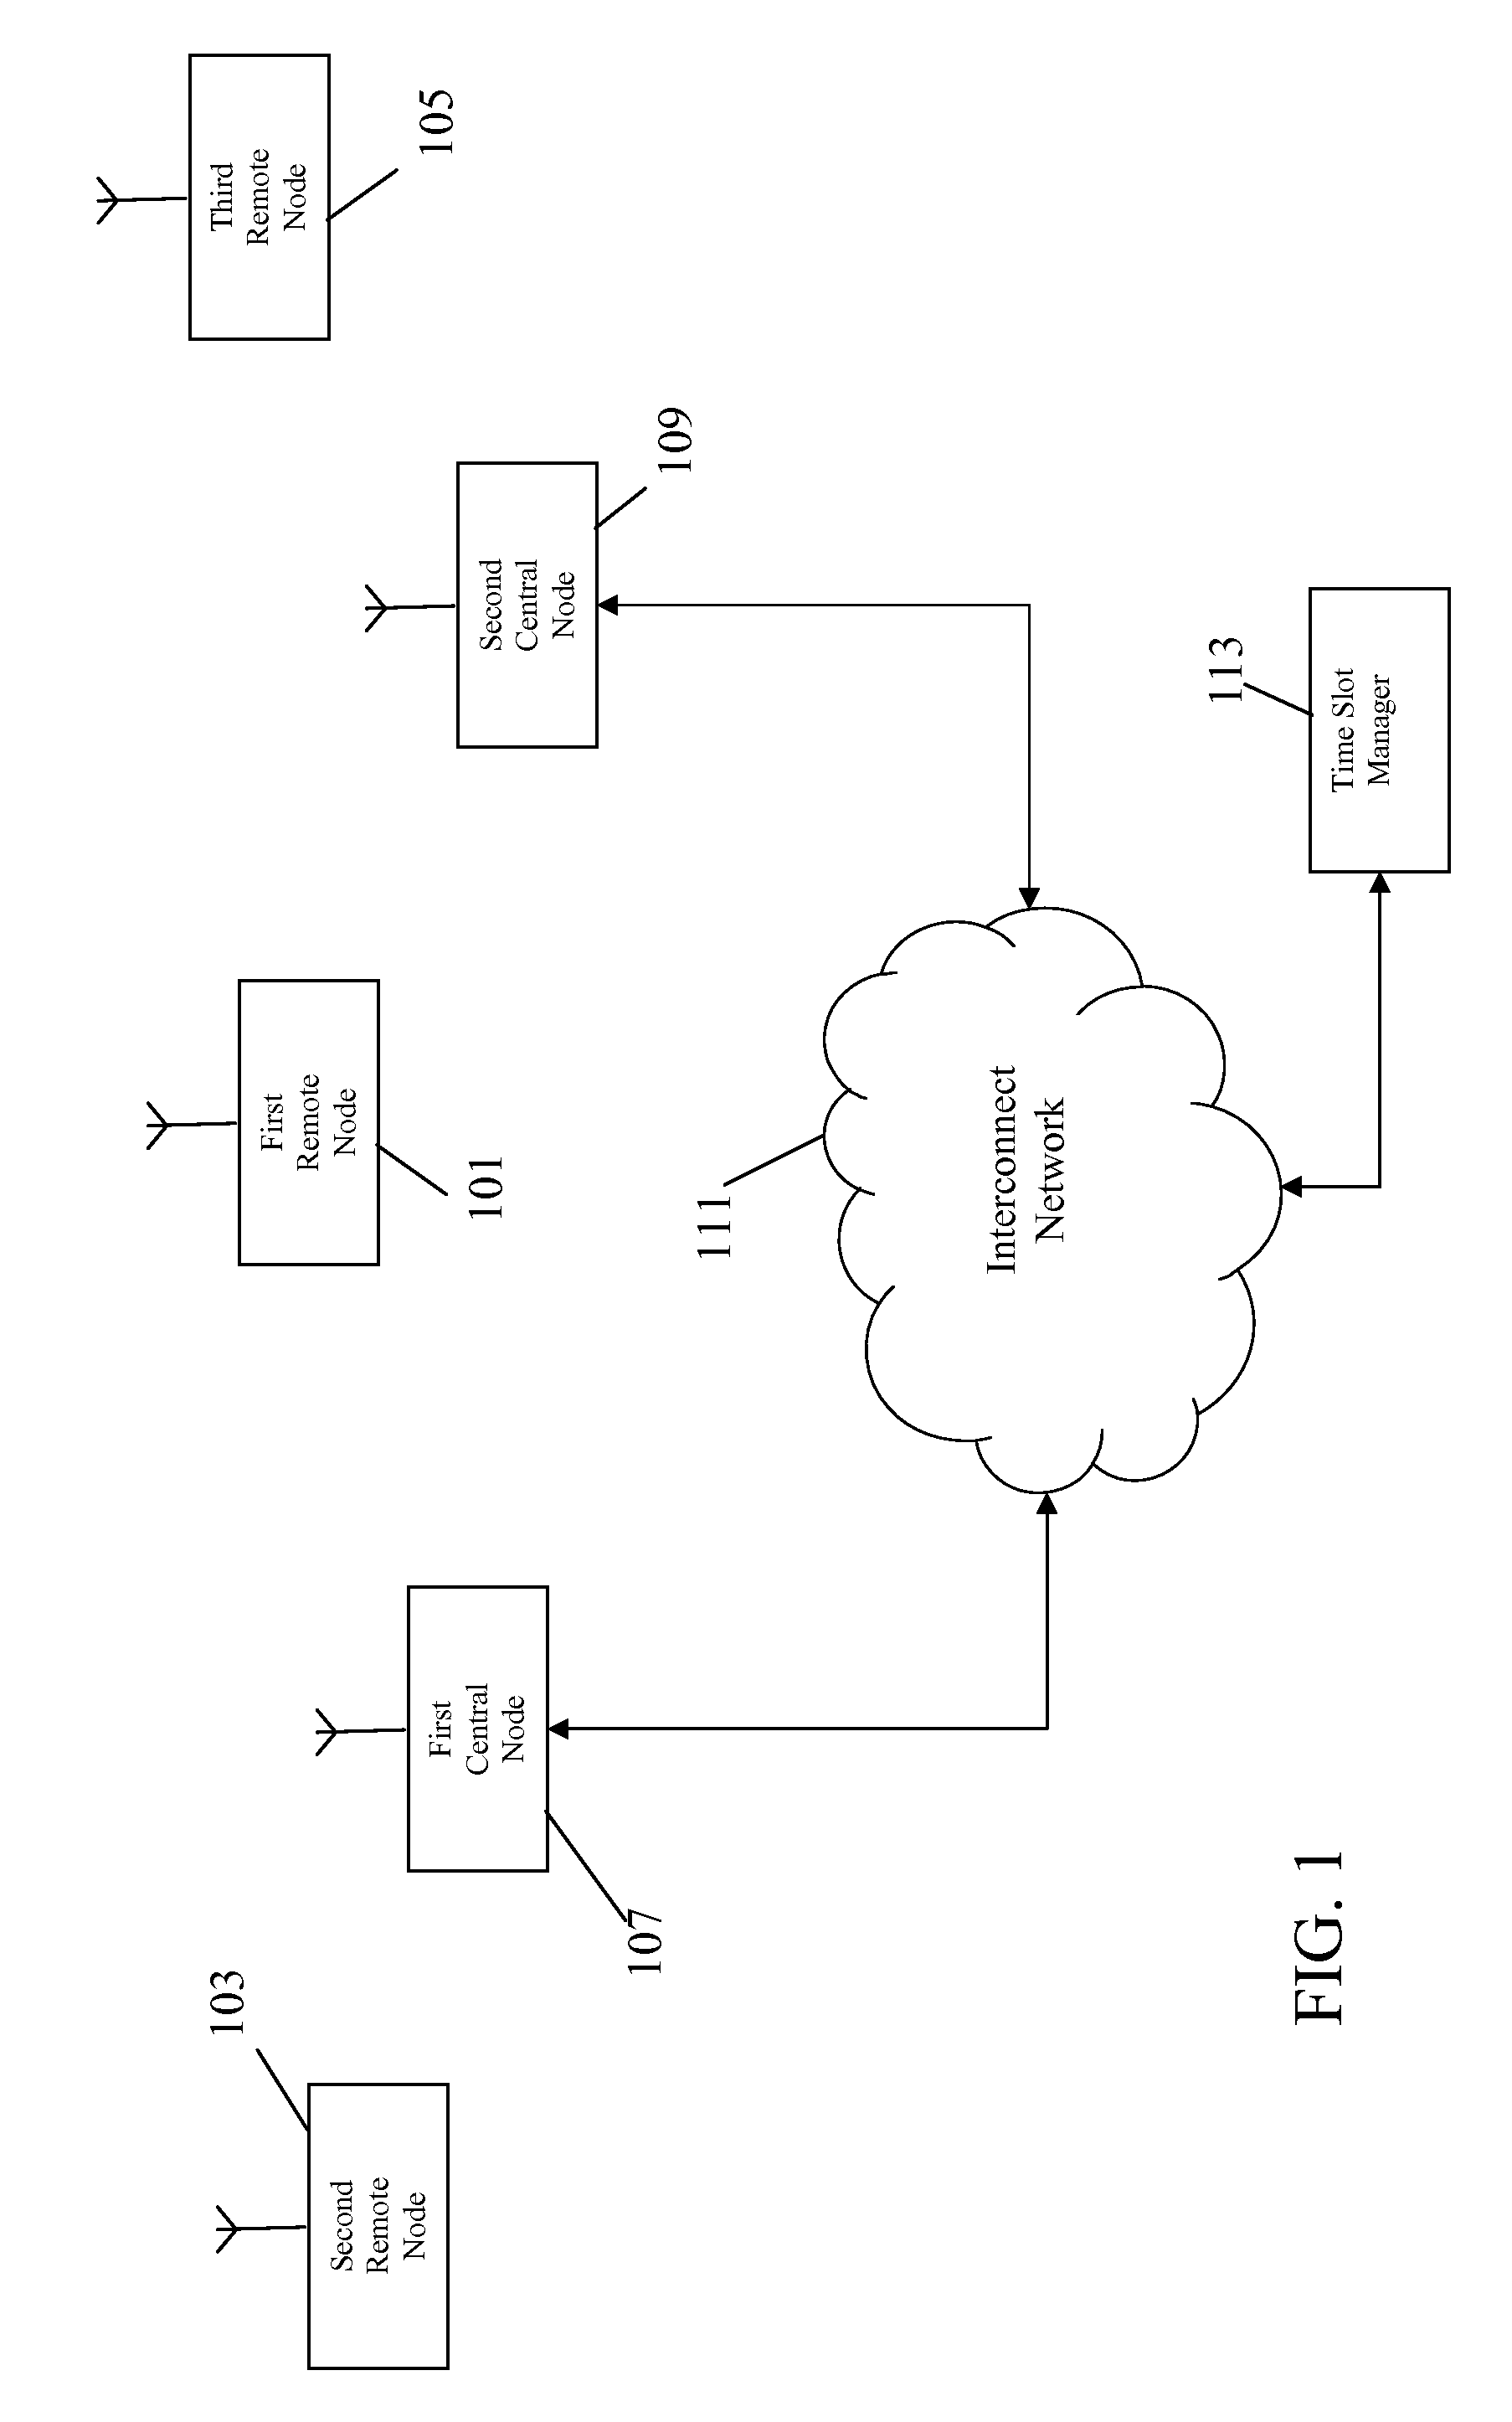 Orthogonal frequency domain multiplexing (OFDM) communication system